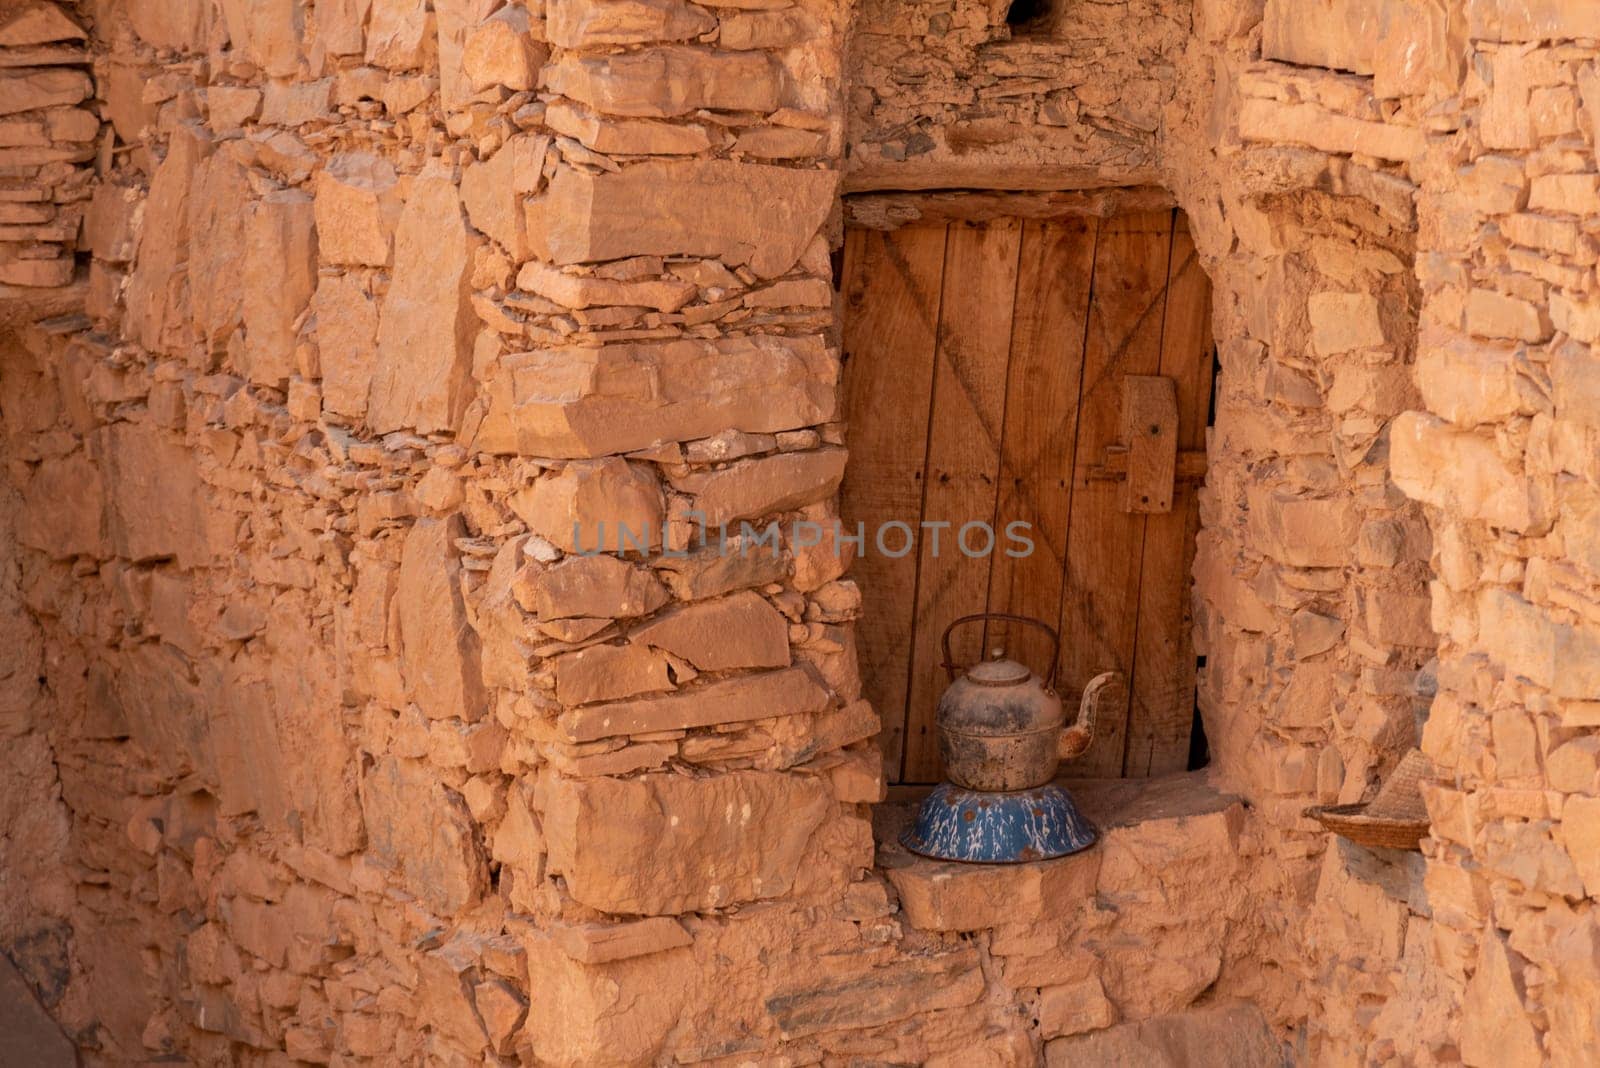 An old tea can in front of an antique window shutter of a berber house in Morocco